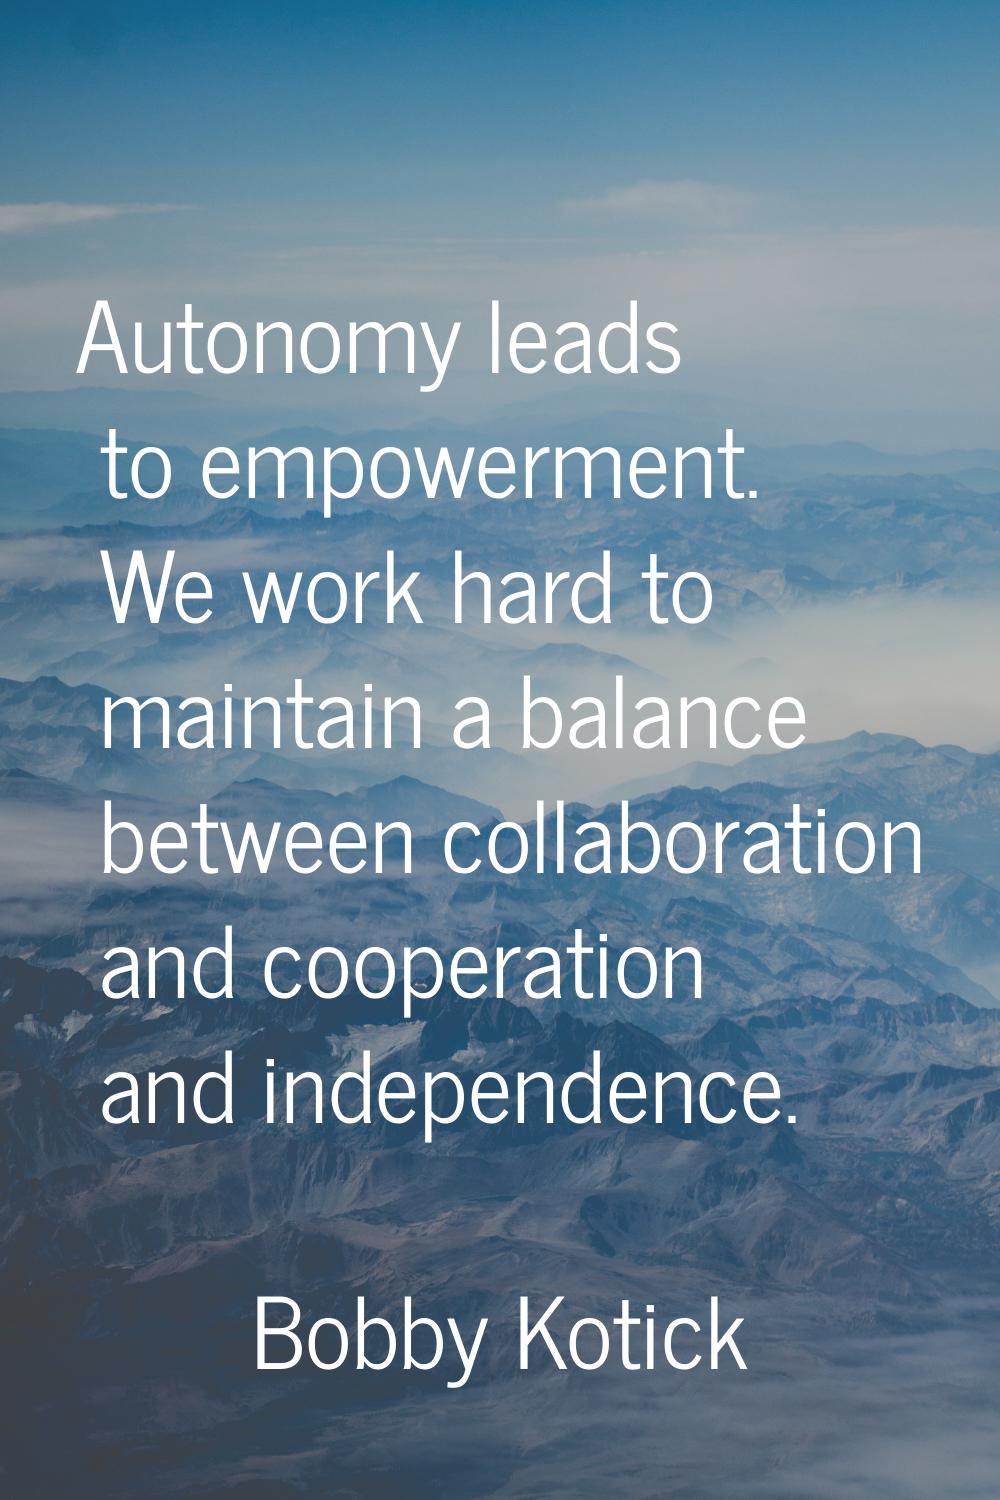 Autonomy leads to empowerment. We work hard to maintain a balance between collaboration and coopera